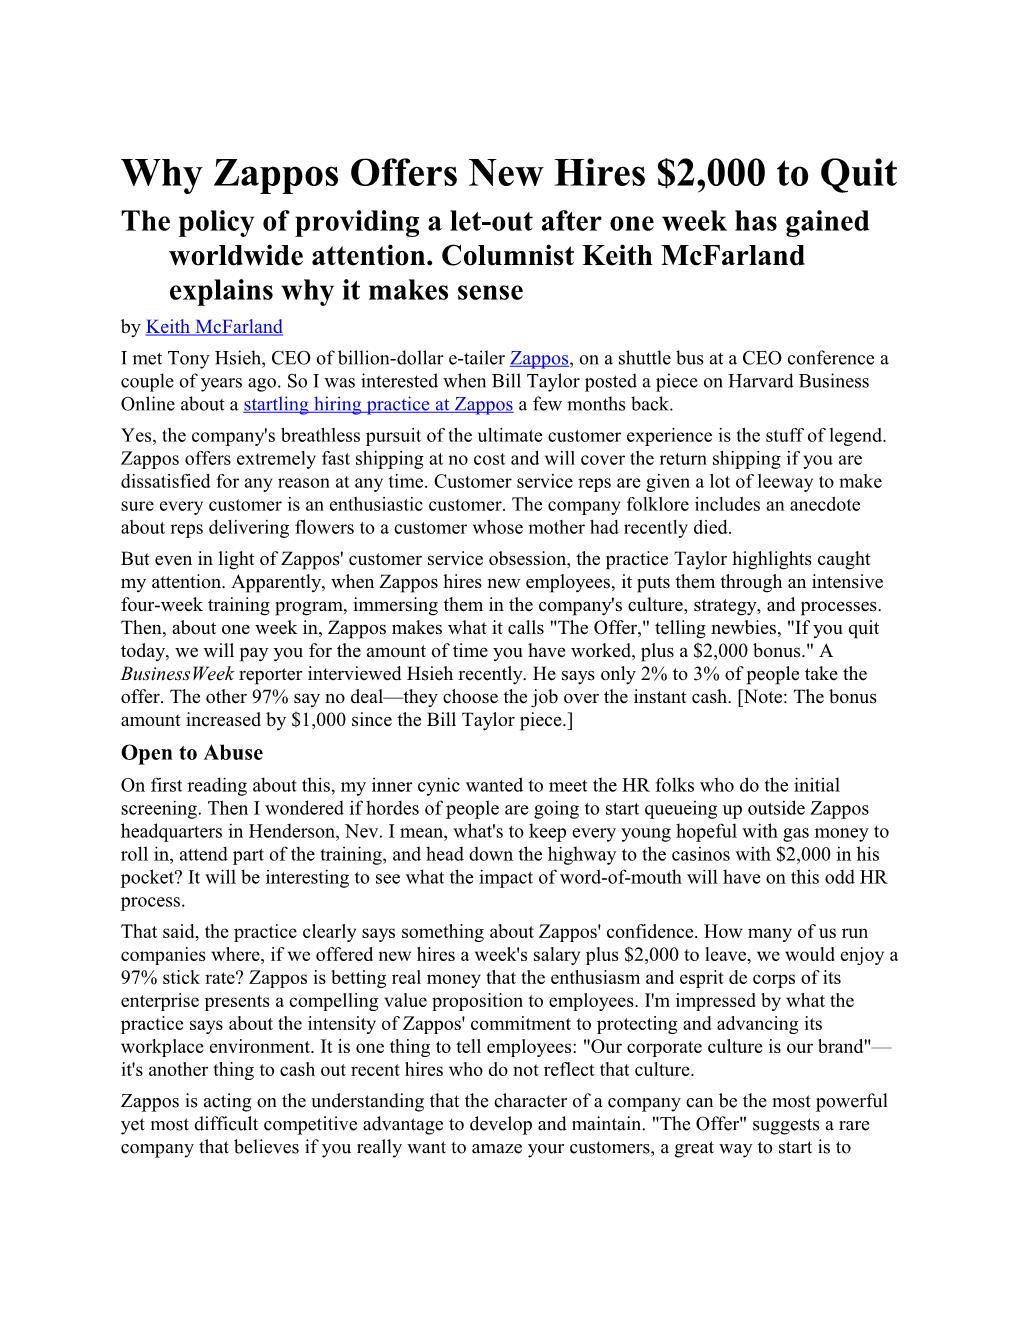 Why Zappos Offers New Hires $2,000 to Quit